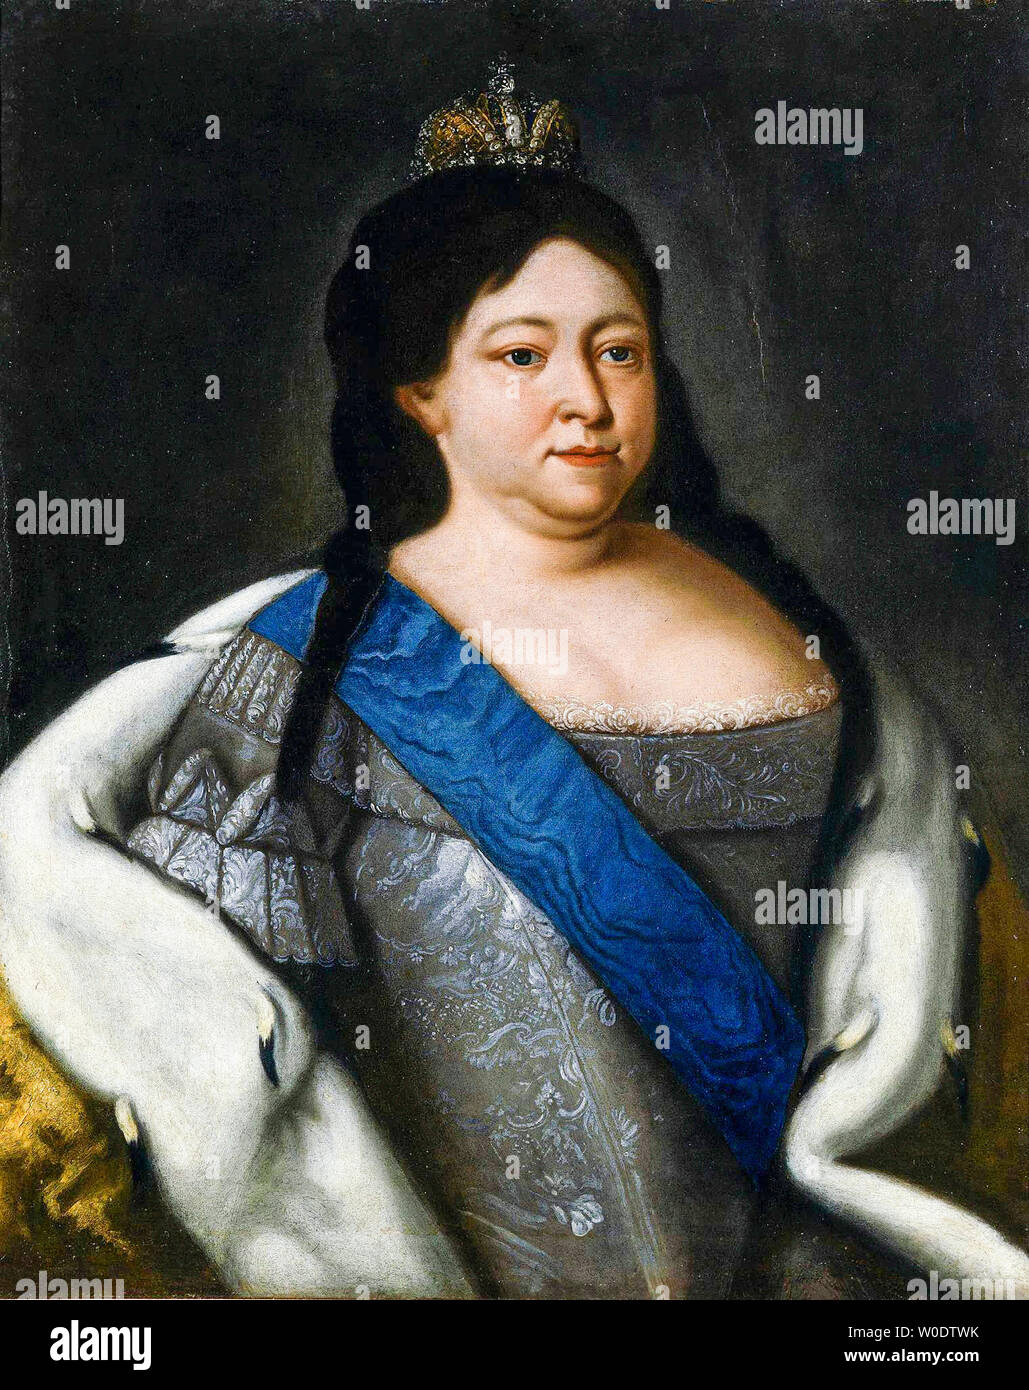 Empress Anna of Russia, 1693-1740, portrait painting, 1700-1799 Stock Photo